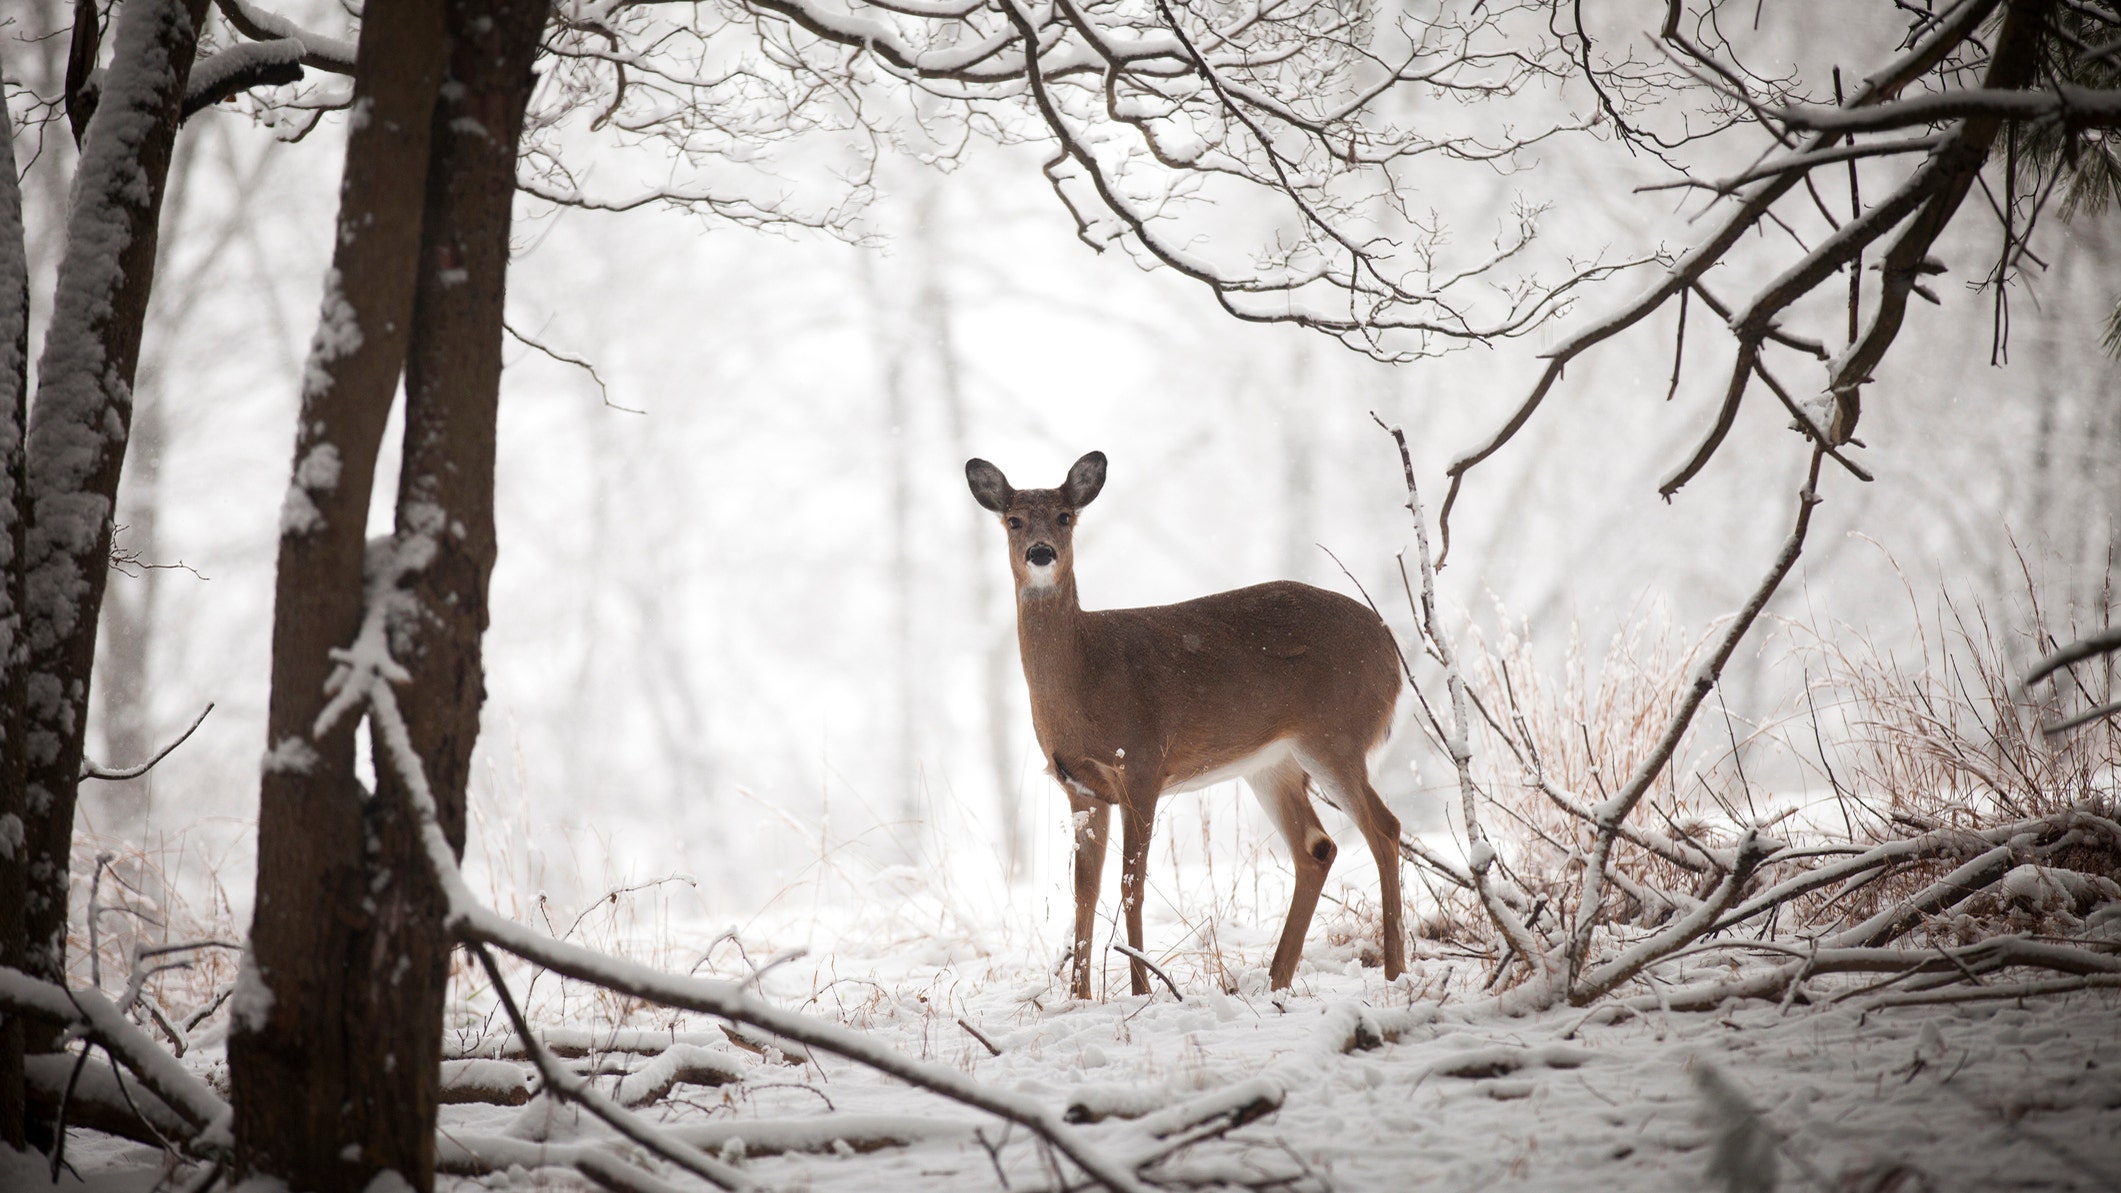 New York extends hunting season by 1 week for 'Holiday Deer Hunt'